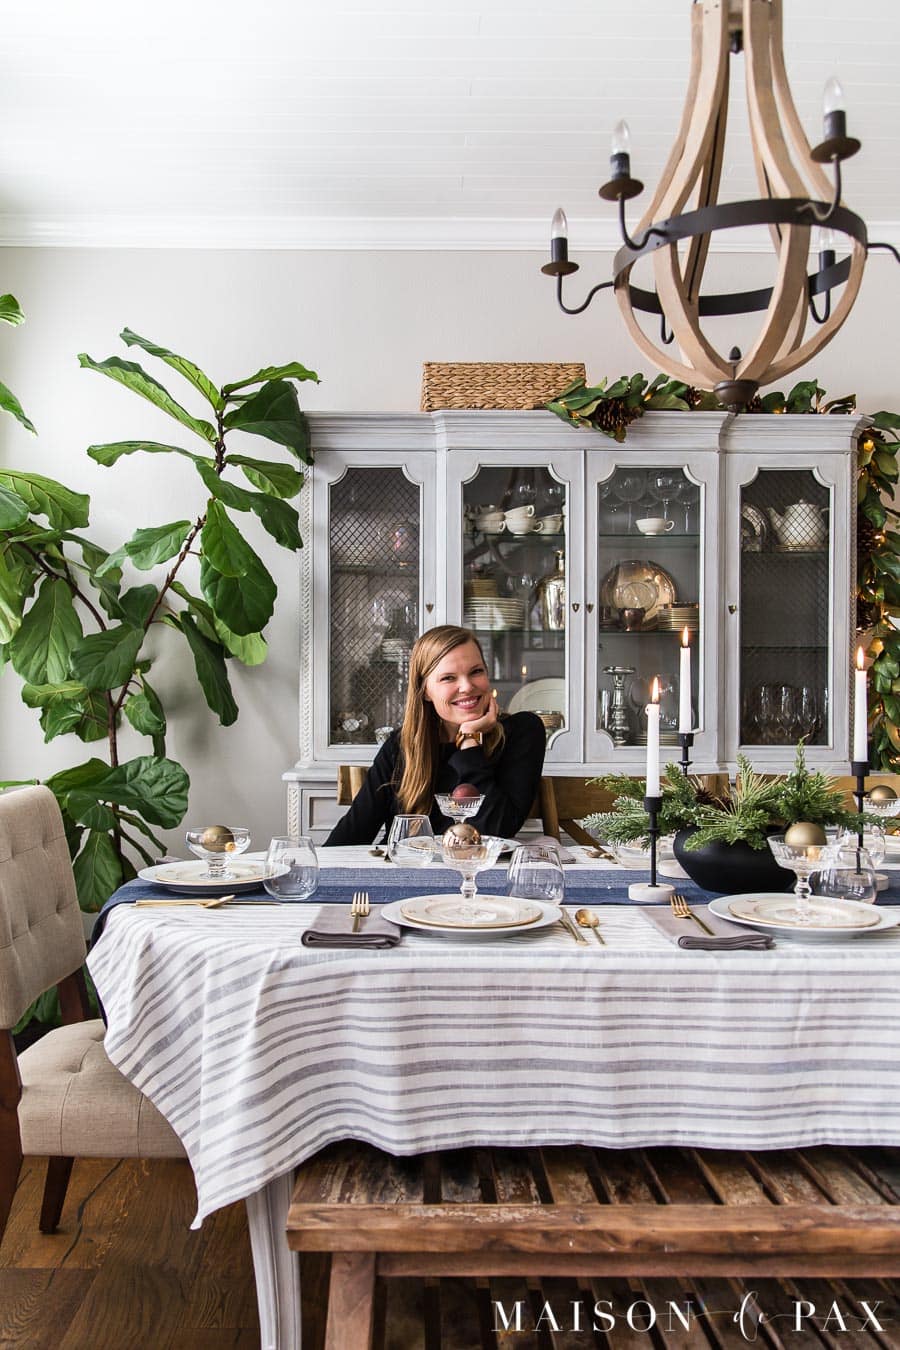 5 Tips for an Elegant + Simple Holiday Table